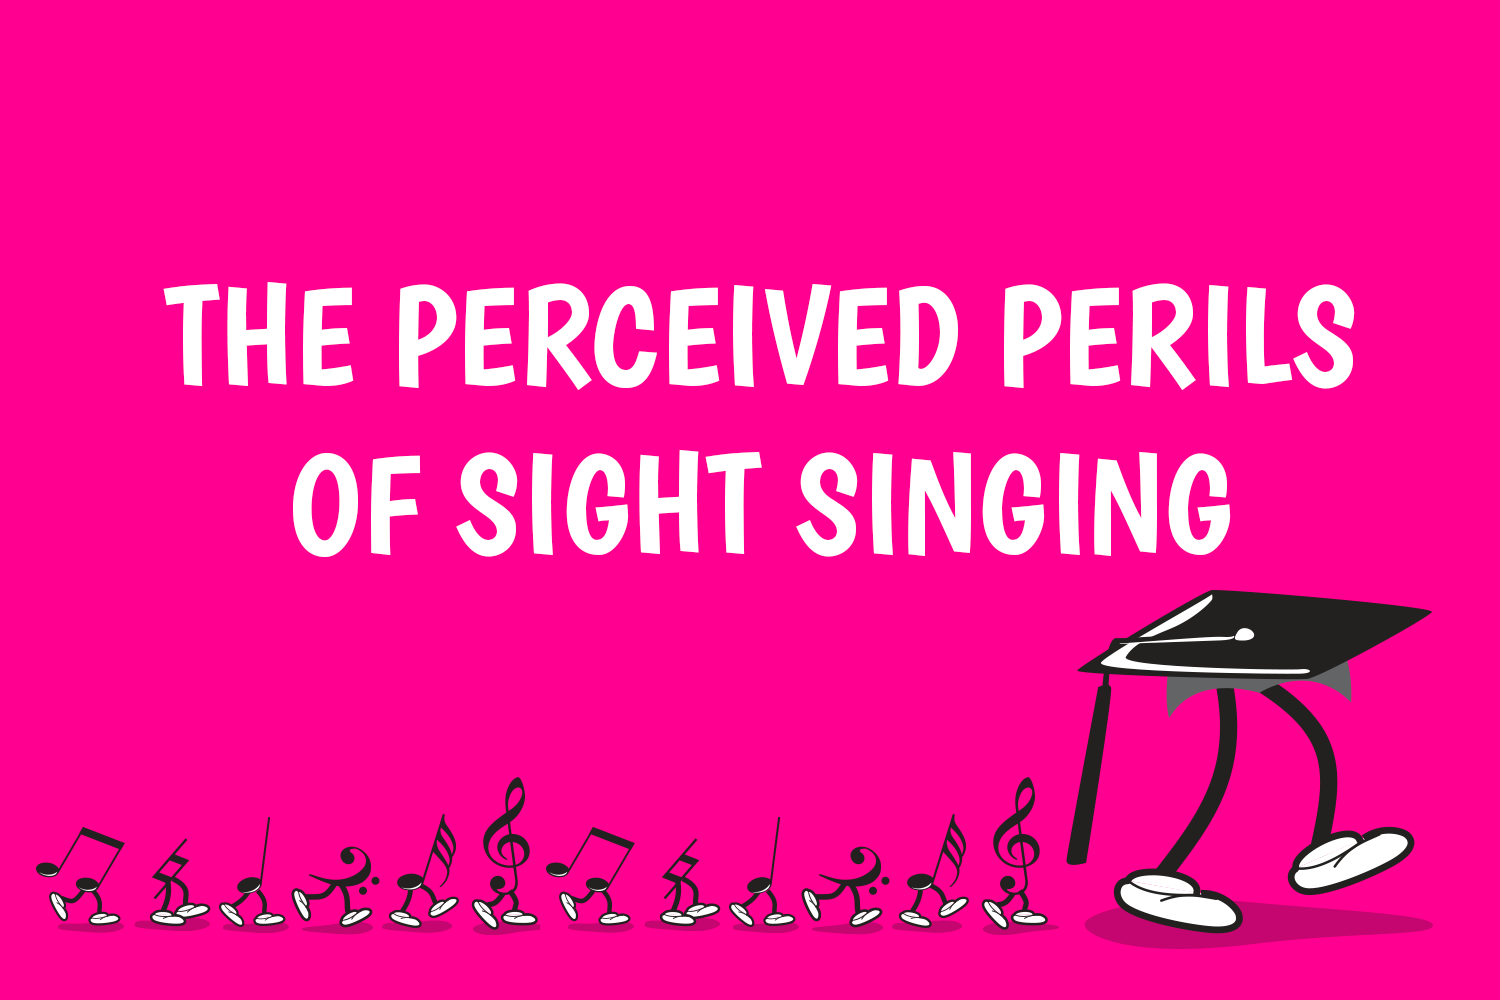 The Perceived Perils of Sight Singing